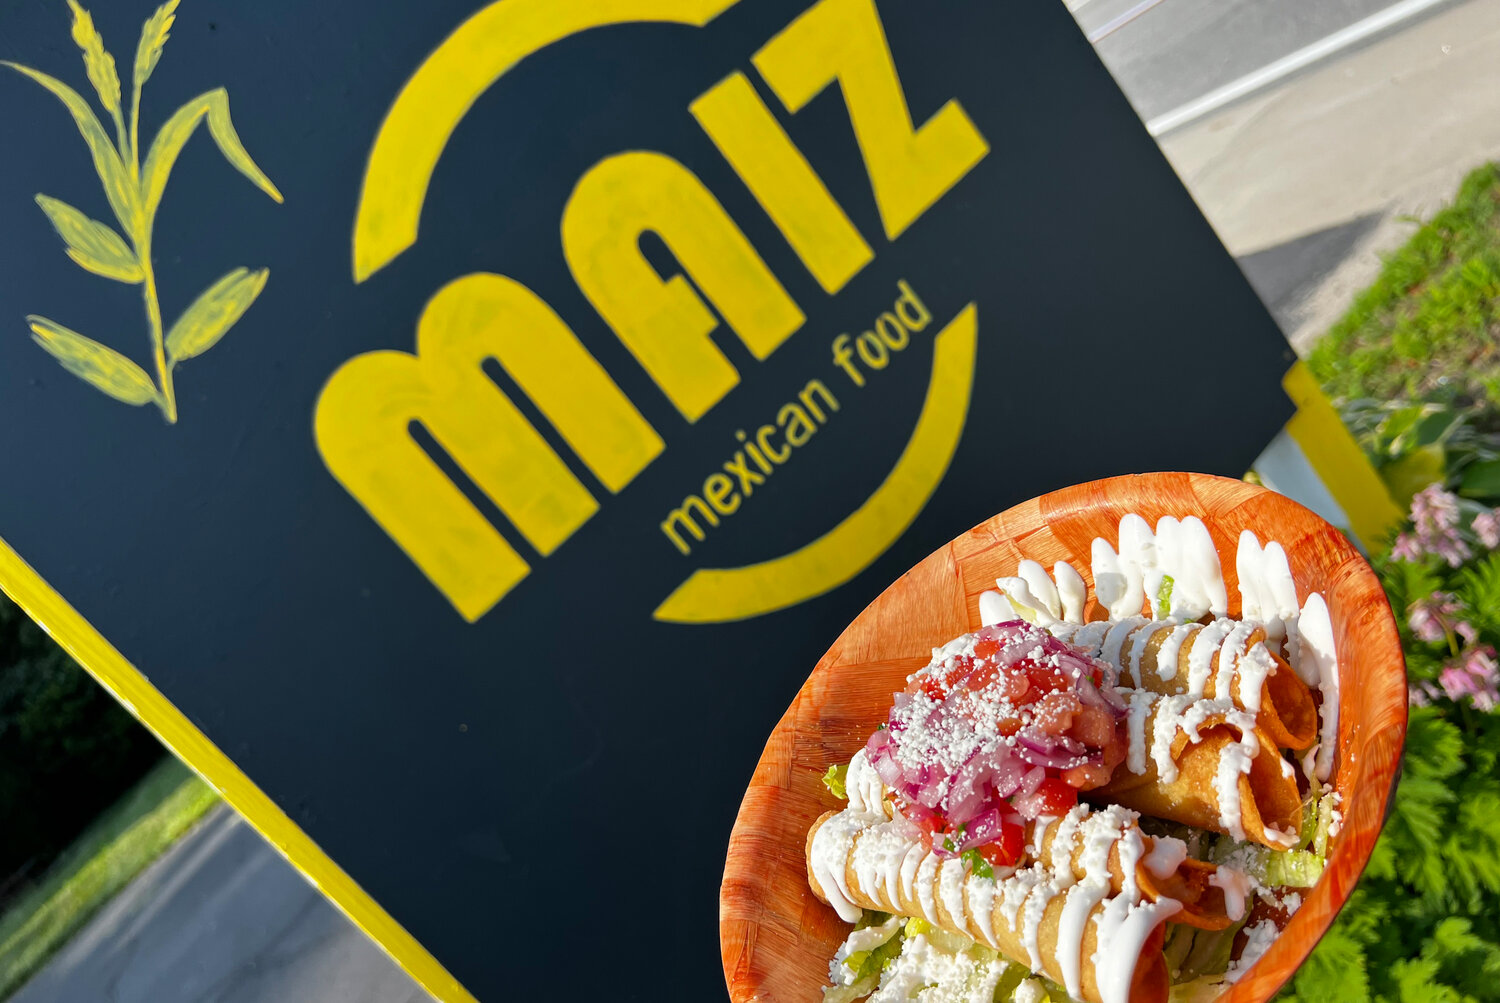 Maiz serves up authentic Mexican fare in Wakefield